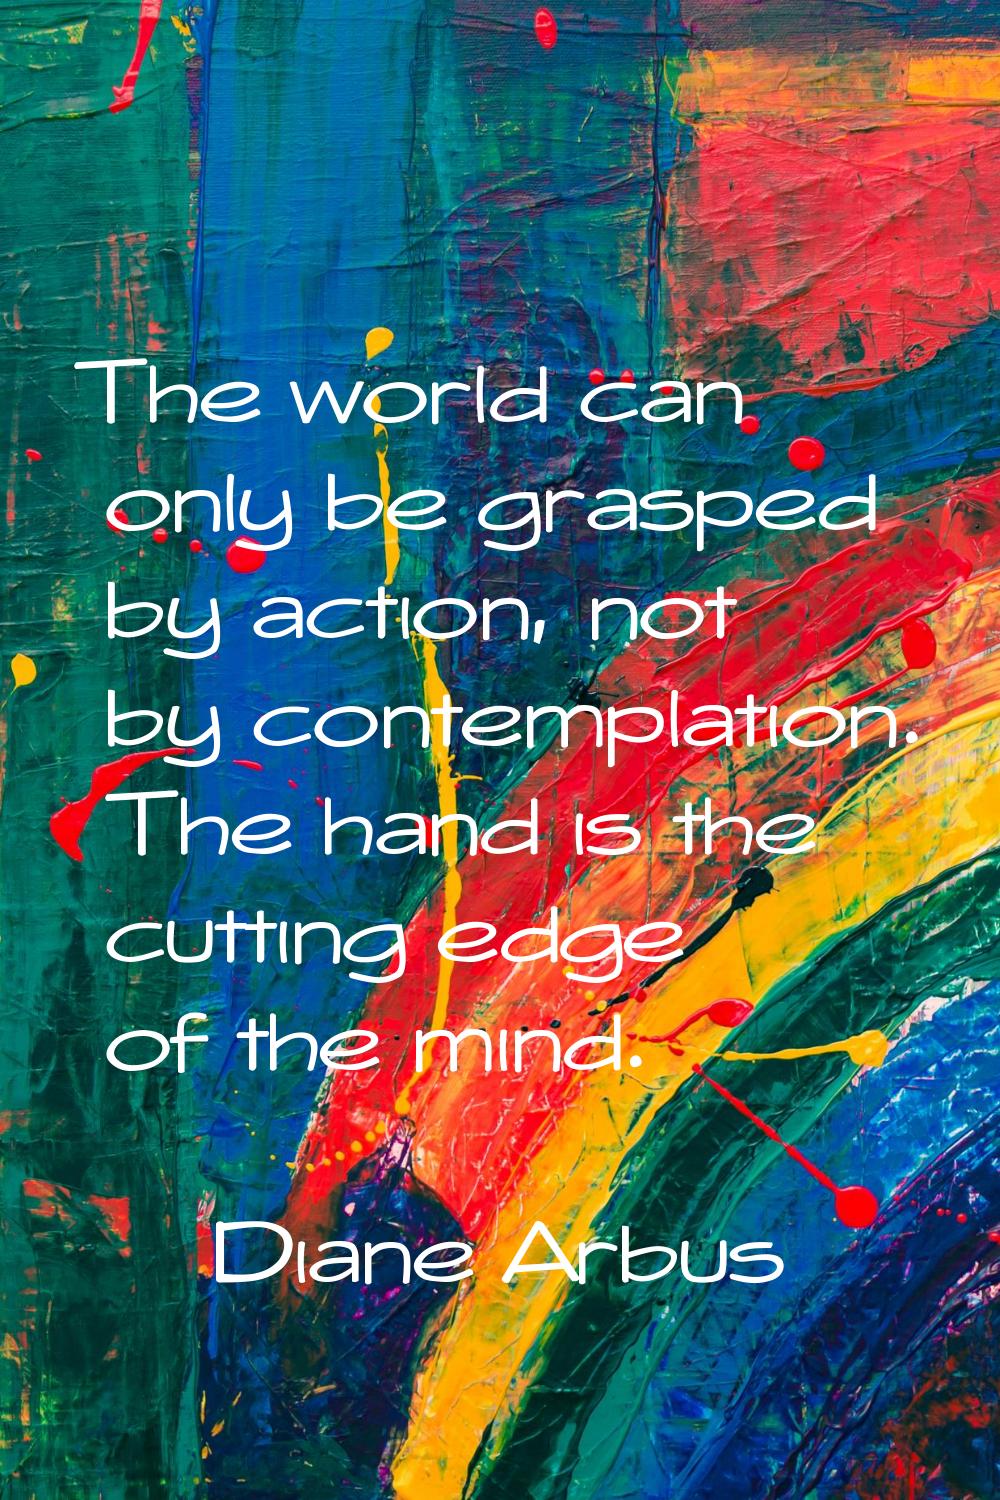 The world can only be grasped by action, not by contemplation. The hand is the cutting edge of the 